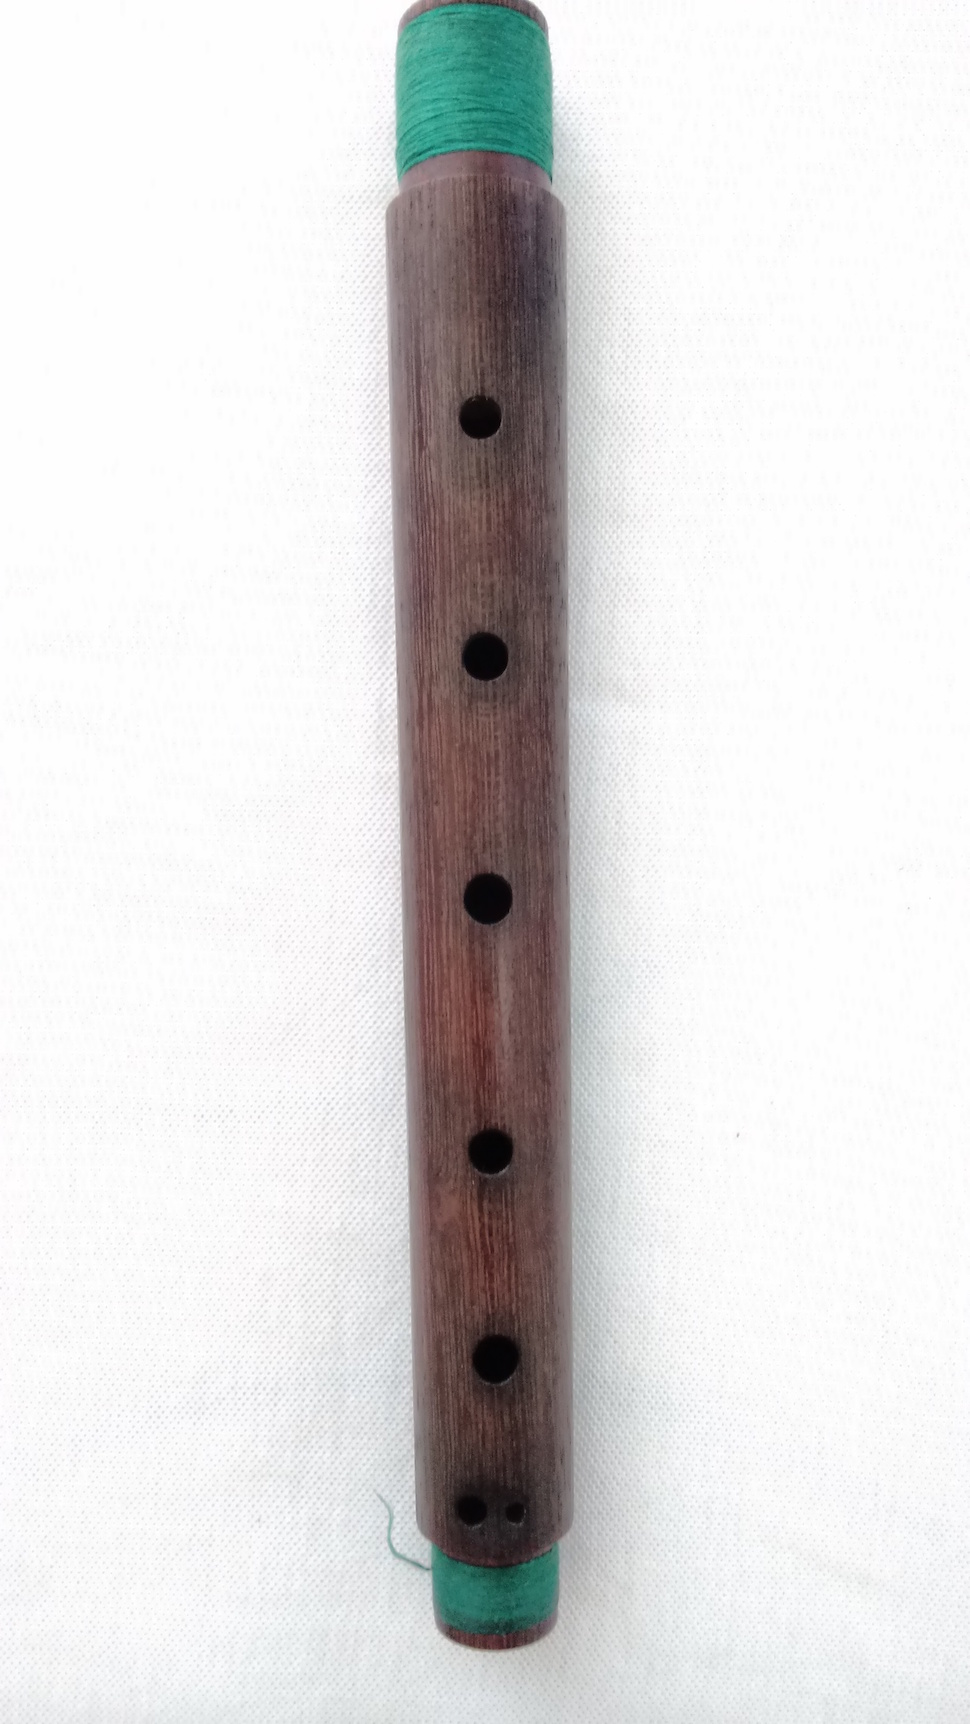 Denner-alto-recorder-by-Marcos-Ximenes-recorders-for-sale-com-02 \u2014 Recorders for sale